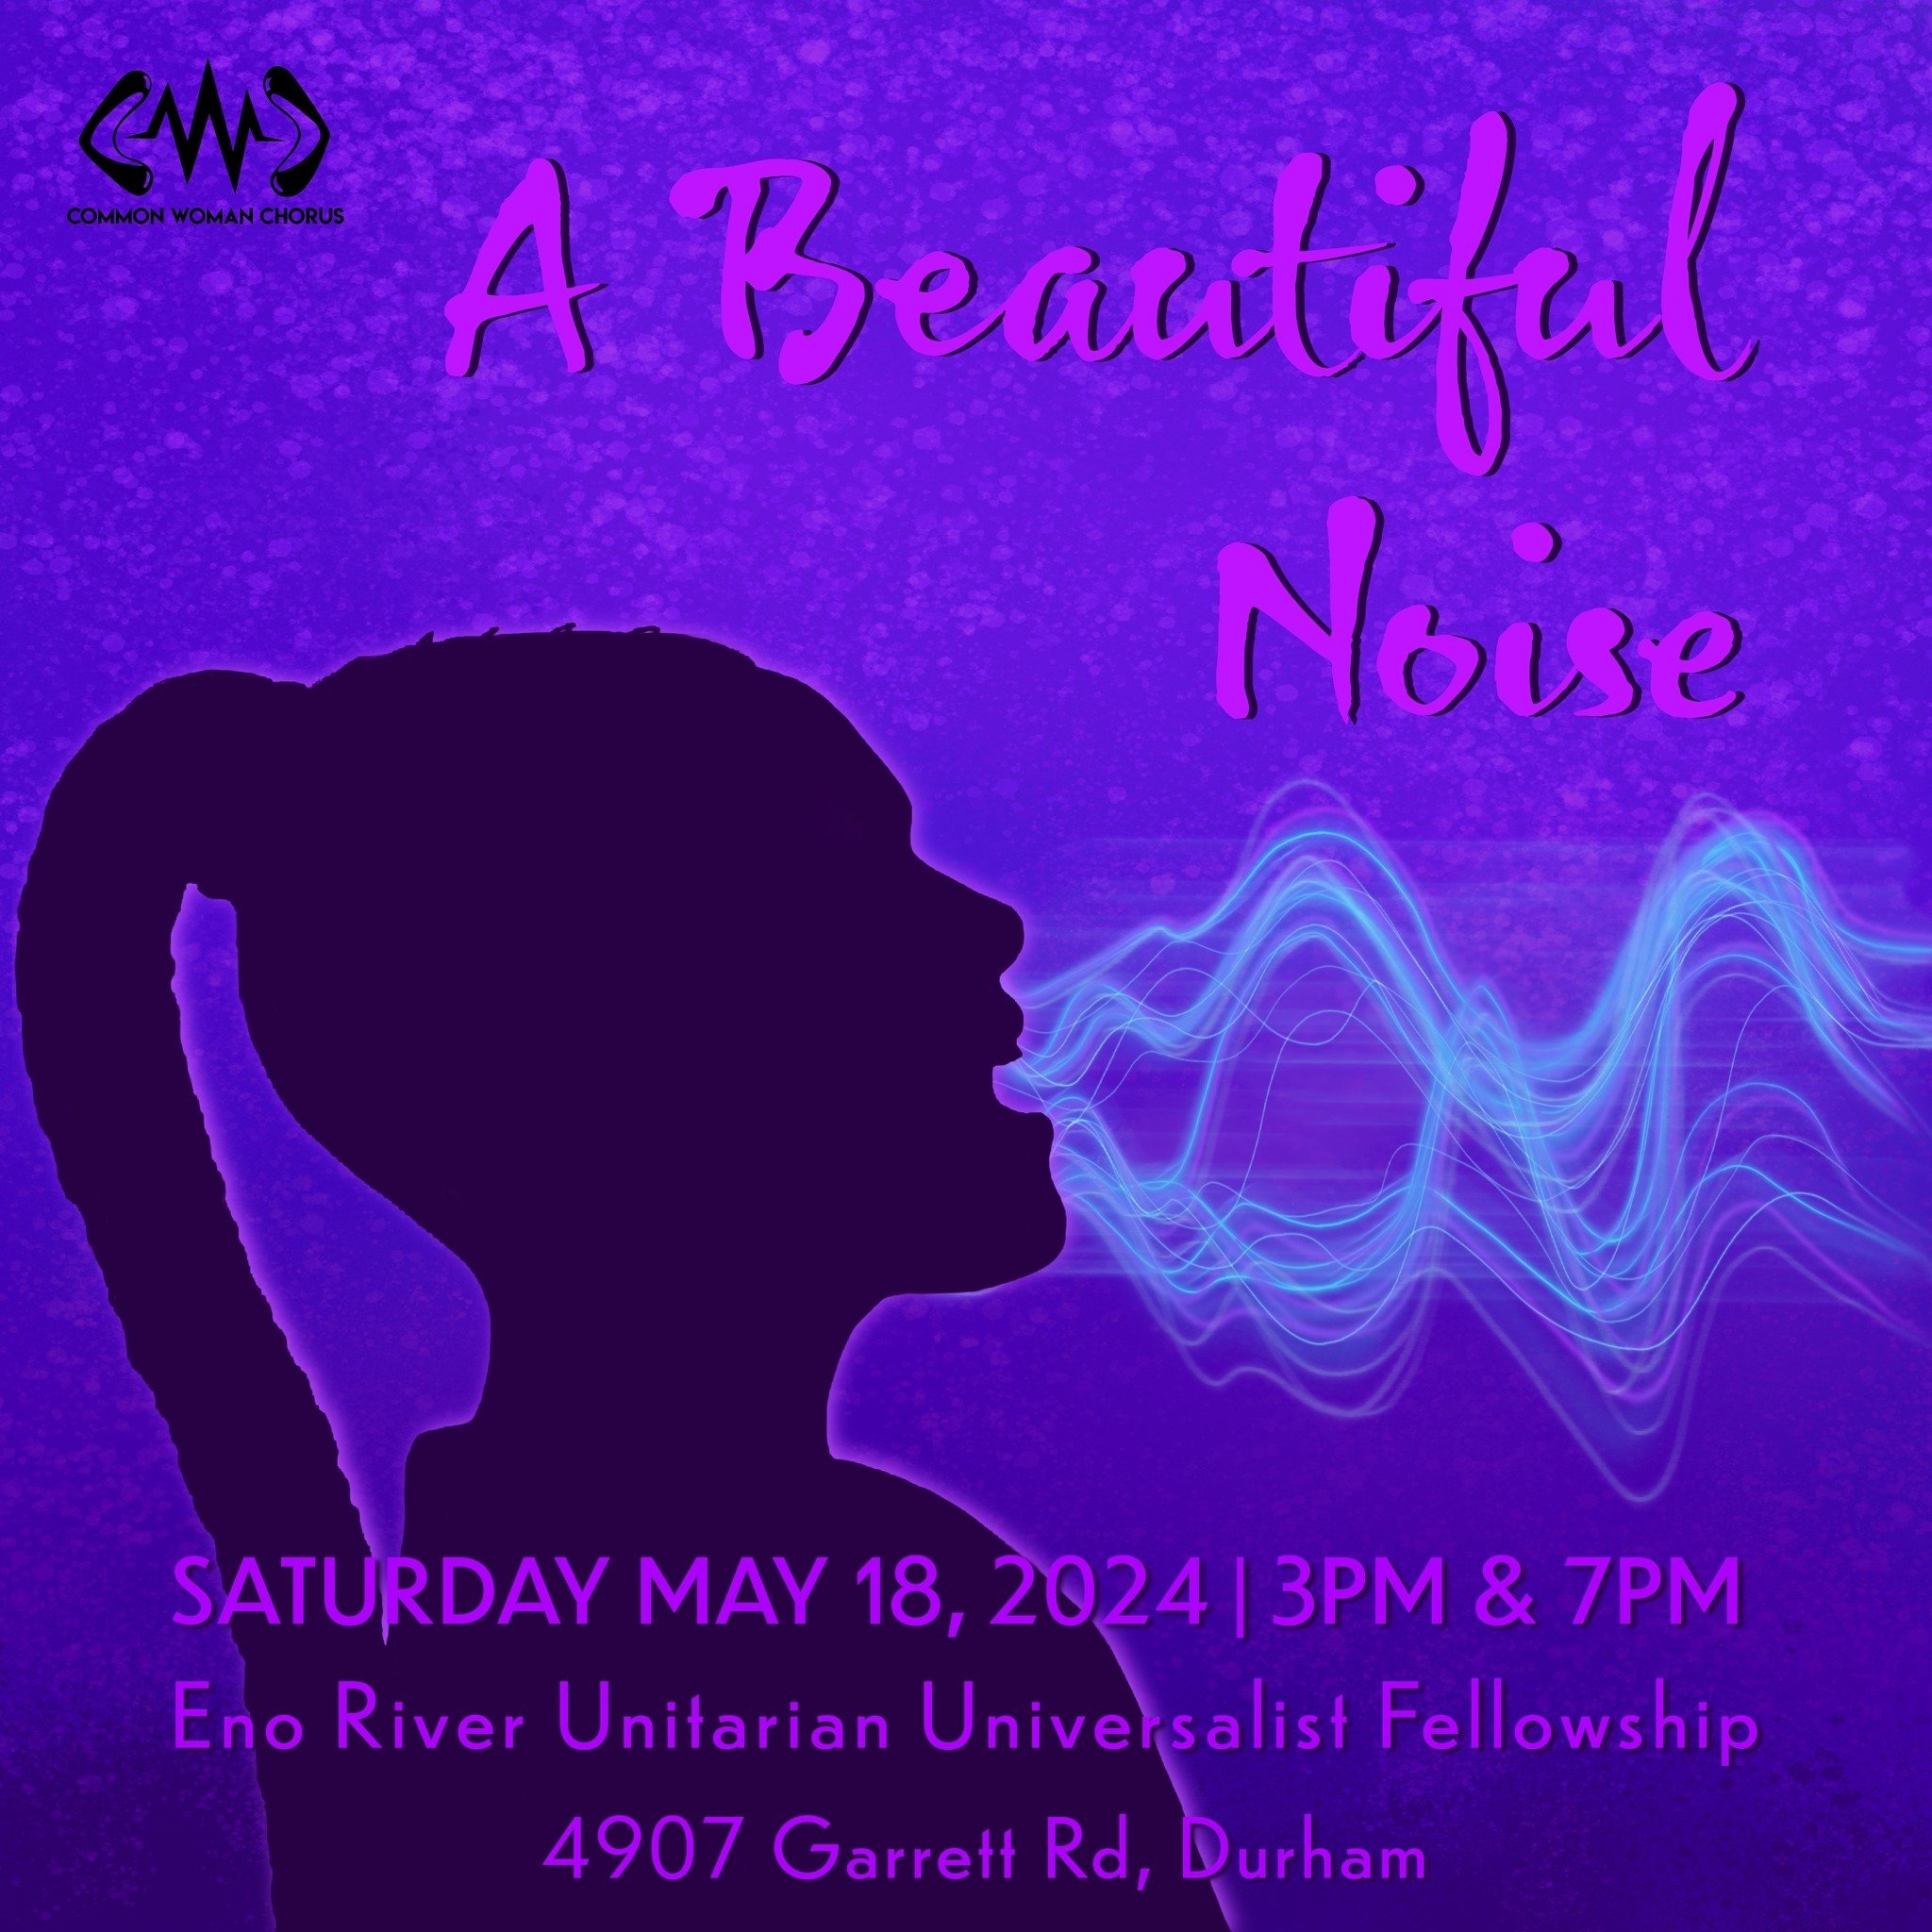 Our spring concert, A Beautiful Noise, is ONE WEEK away! We are a proud group of singers where everyone is free to be exactly who they are. And we look forward with hope for the future generation. We will not let silence win. Join us as we perform so